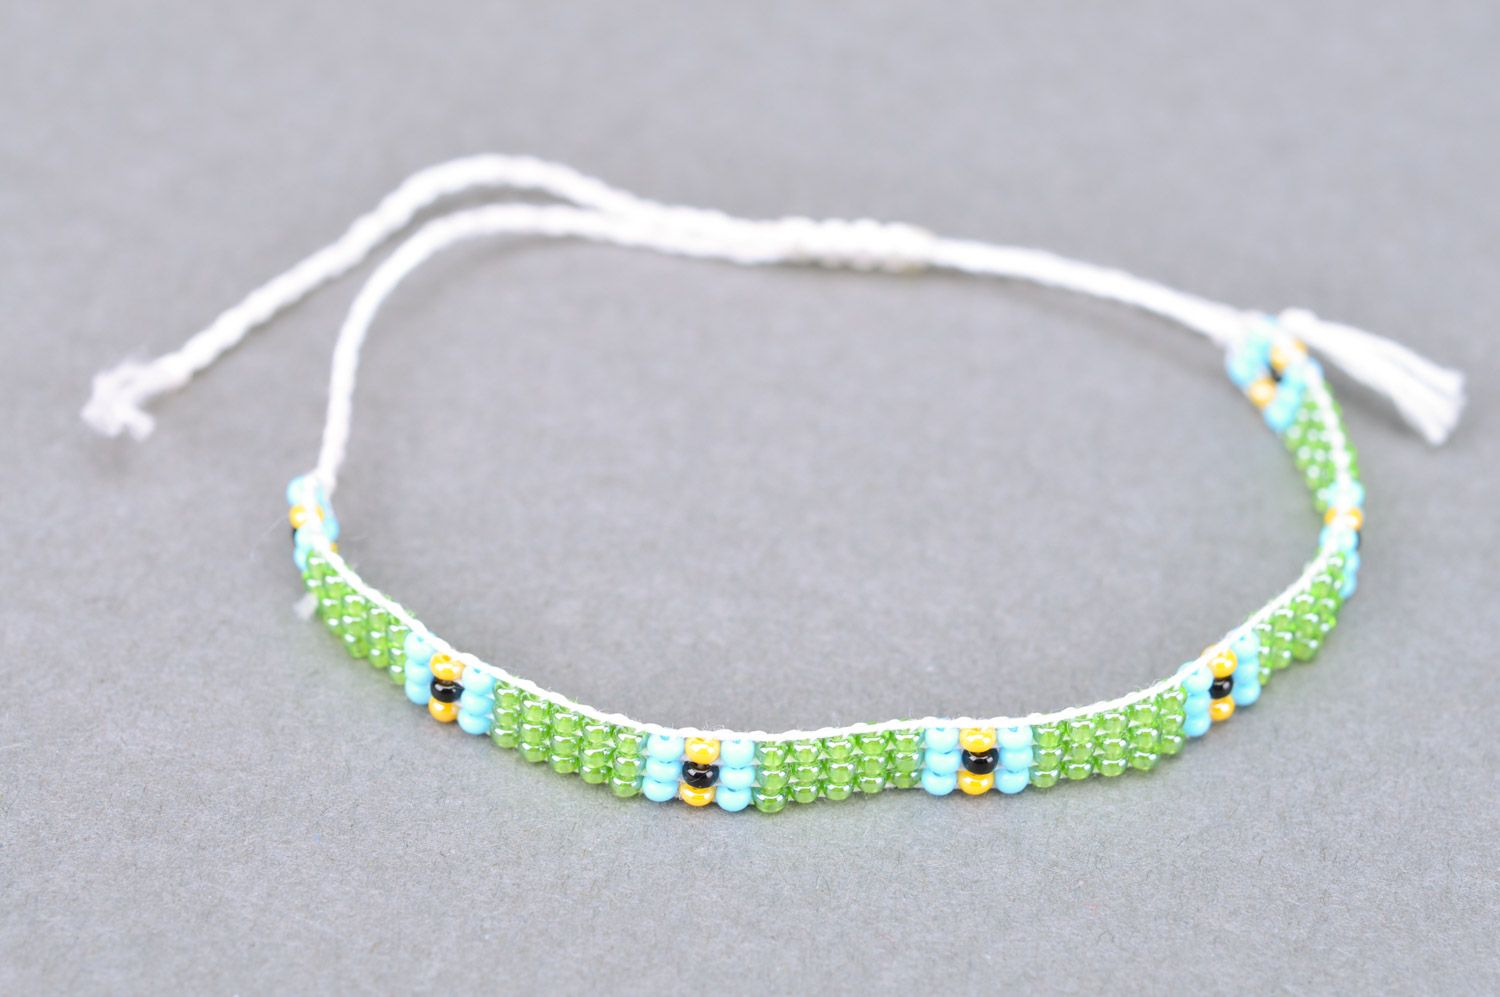 Handmade beaded wrist bracelet of lime and blue colors with ties photo 2